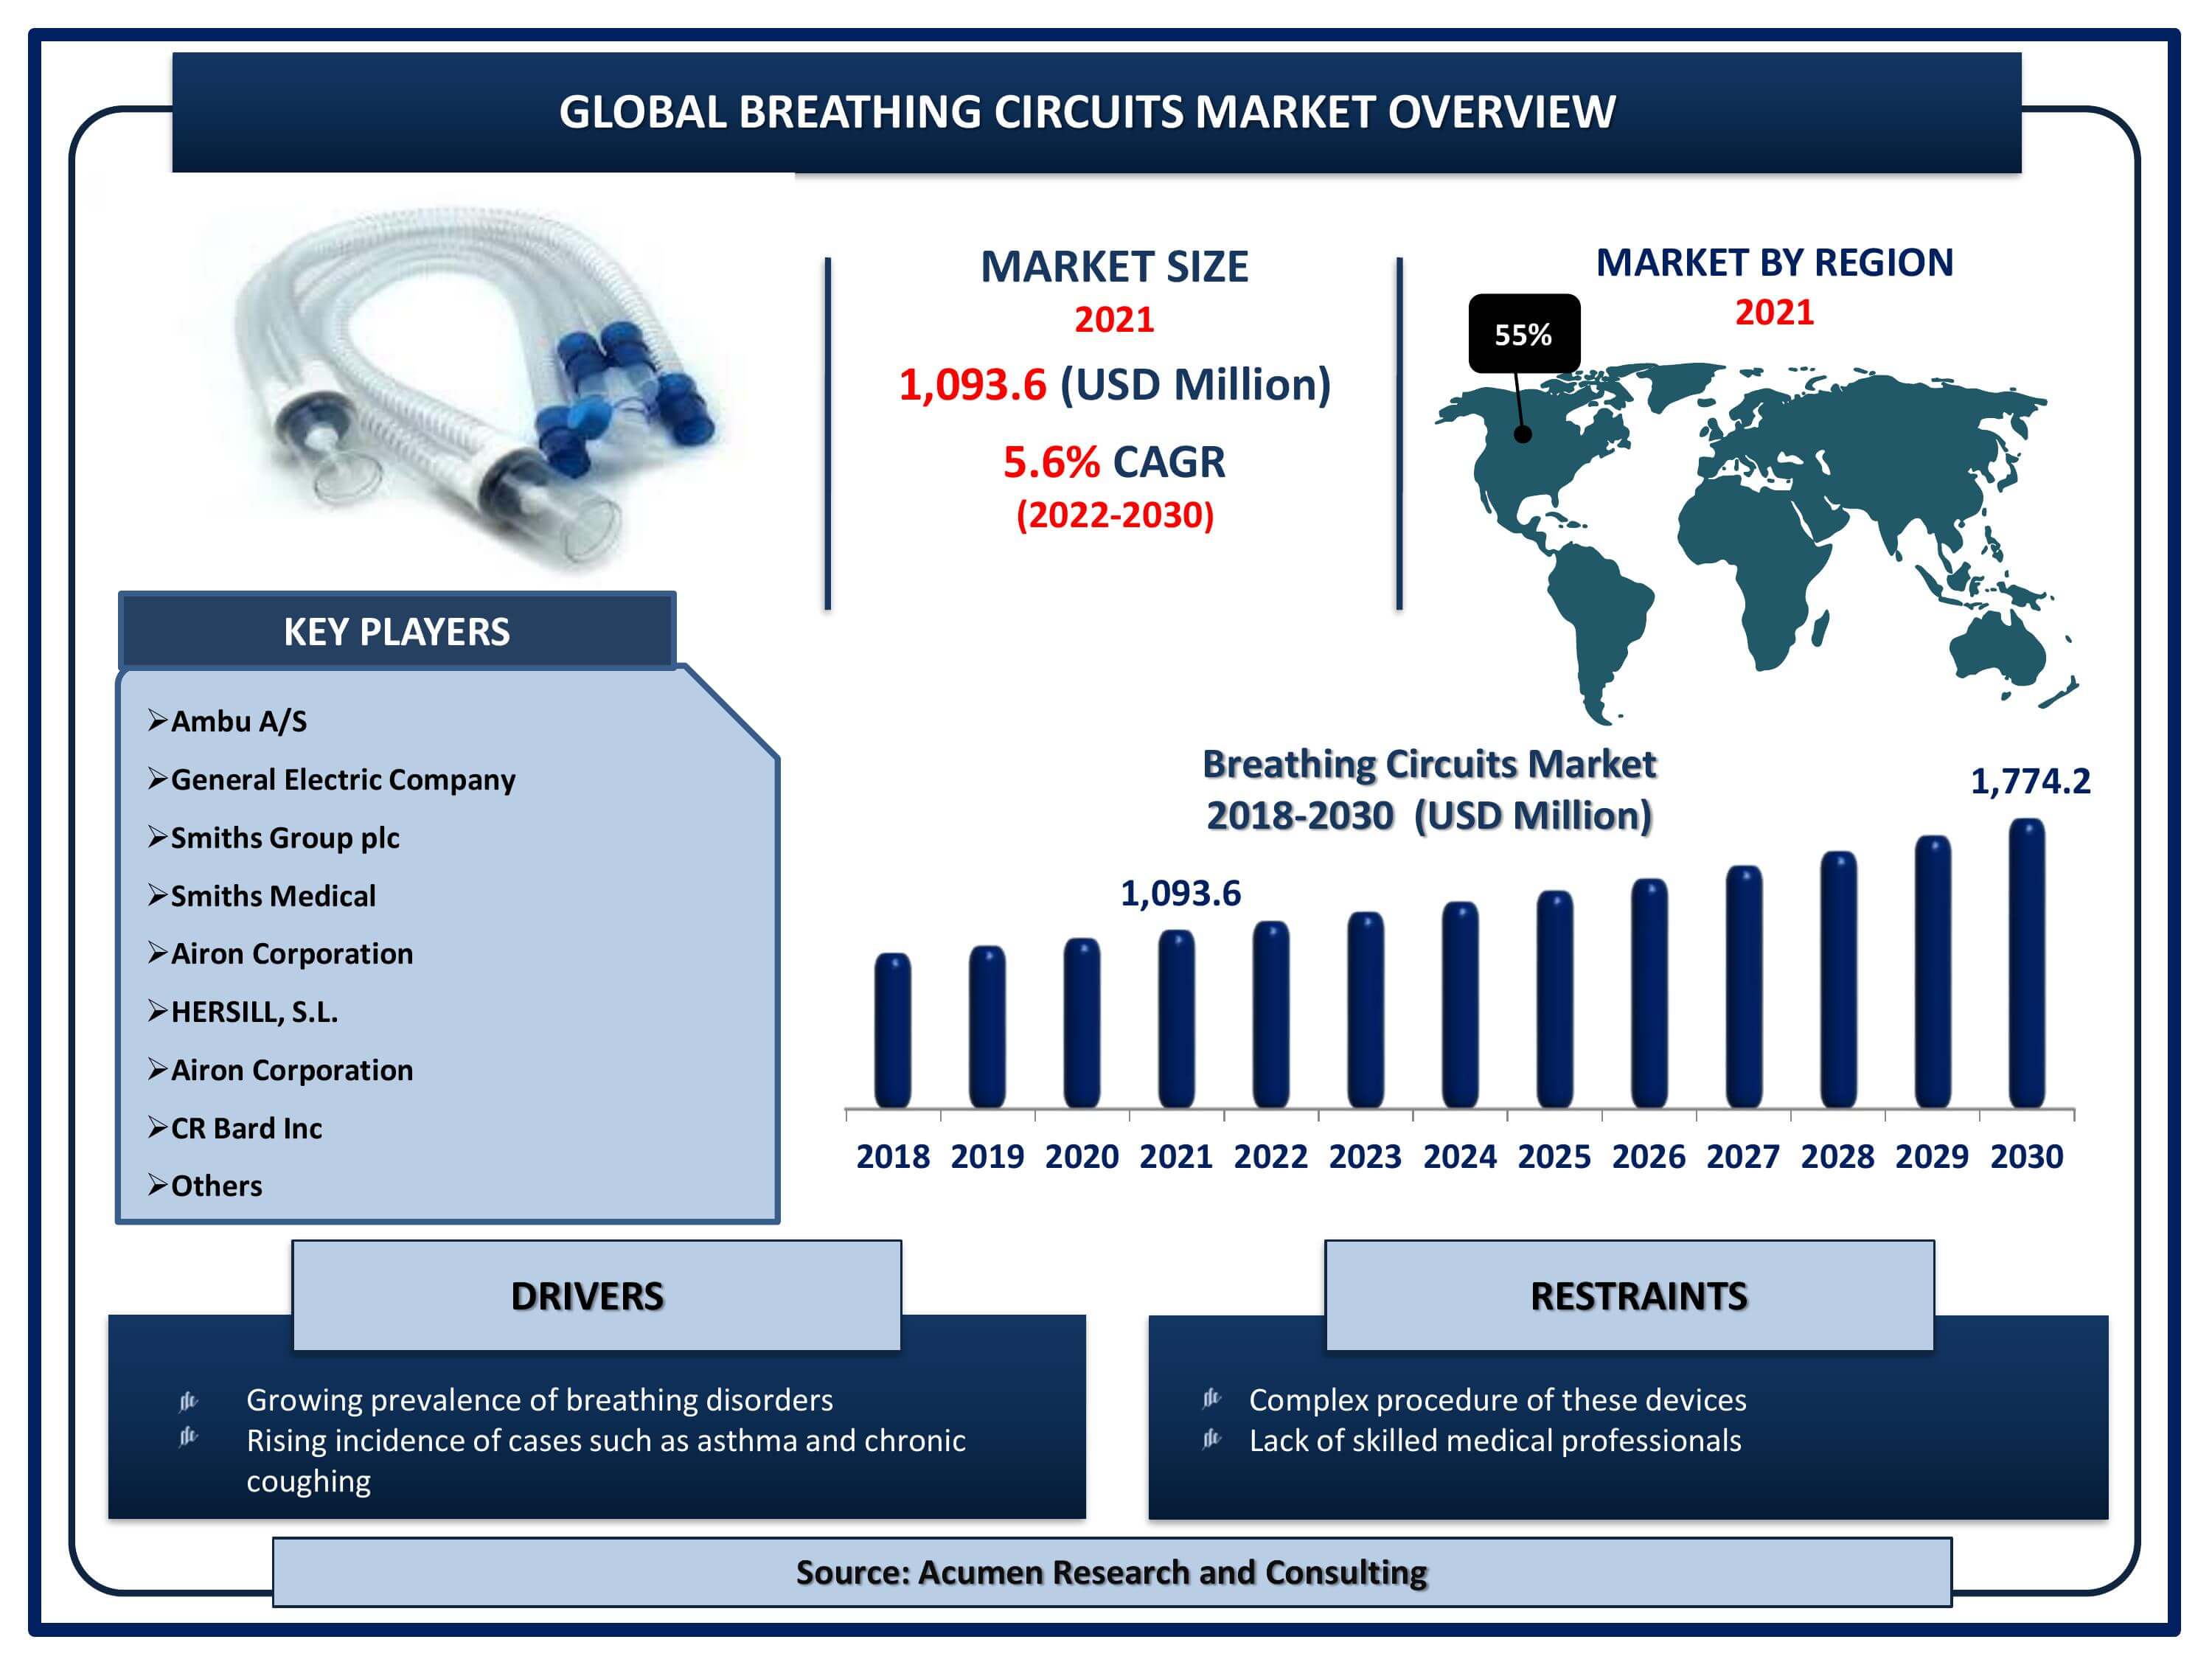 Global breathing circuits market revenue is estimated to reach USD 1,774.2 Million by 2030 with a CAGR of 5.6% from 2022 to 2030